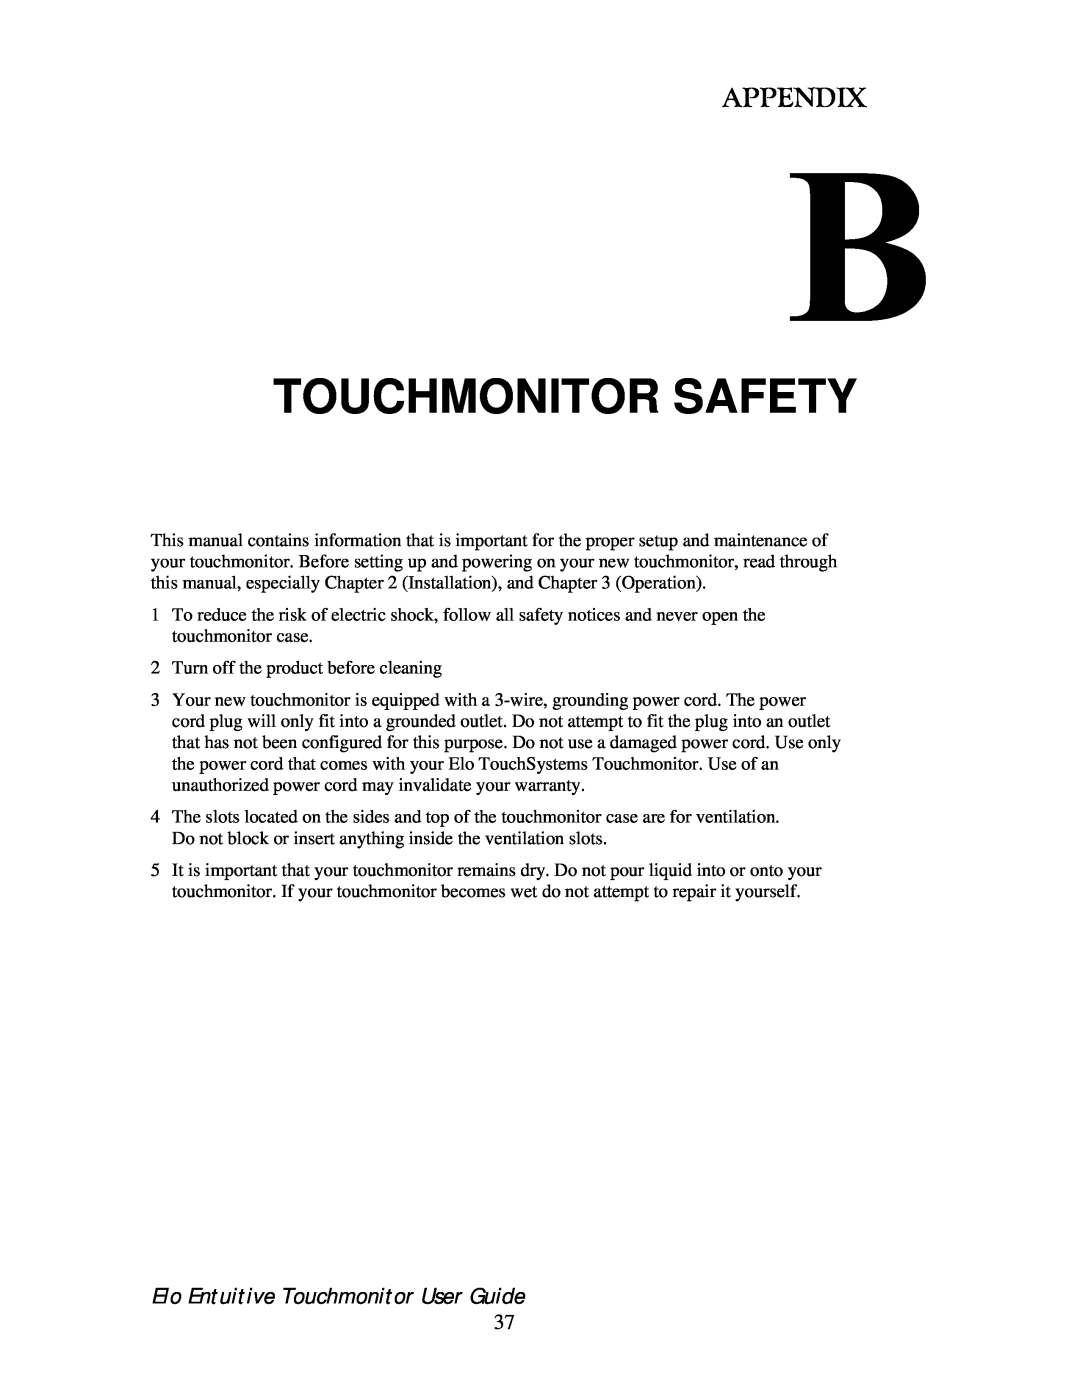 Elo TouchSystems 192XL-XXWA-1 Series manual Touchmonitor Safety, Appendix, Elo Entuitive Touchmonitor User Guide 